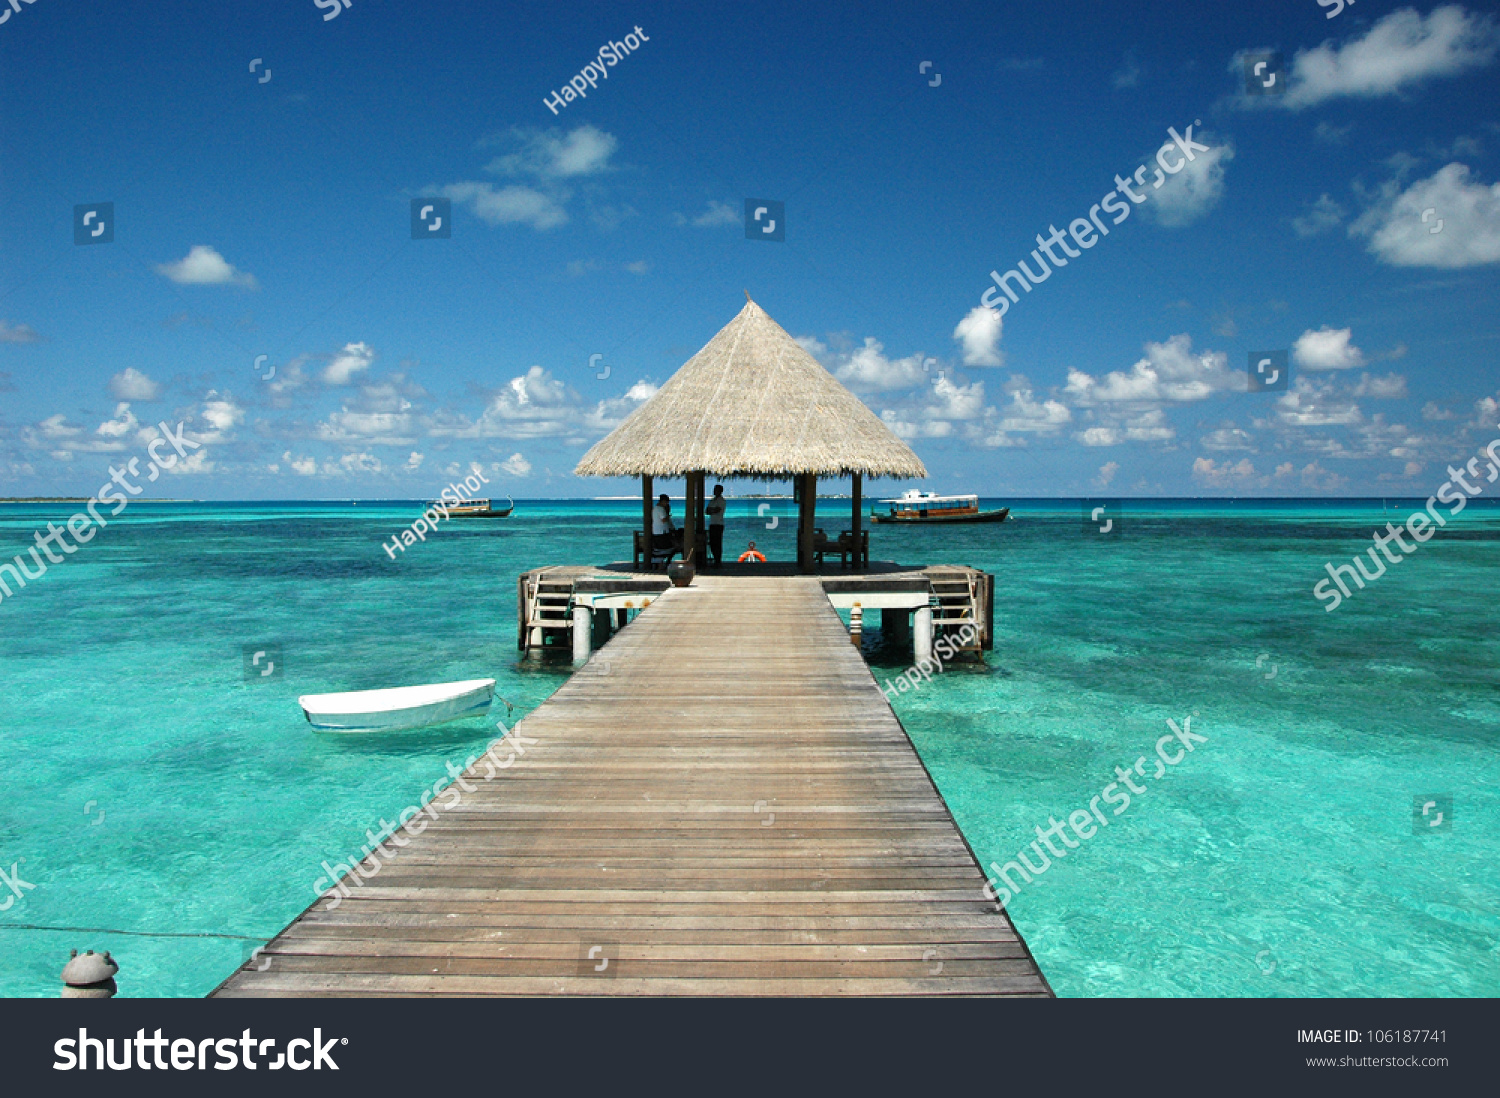 Wooden wharf with pavilion for ships at Maldives #106187741